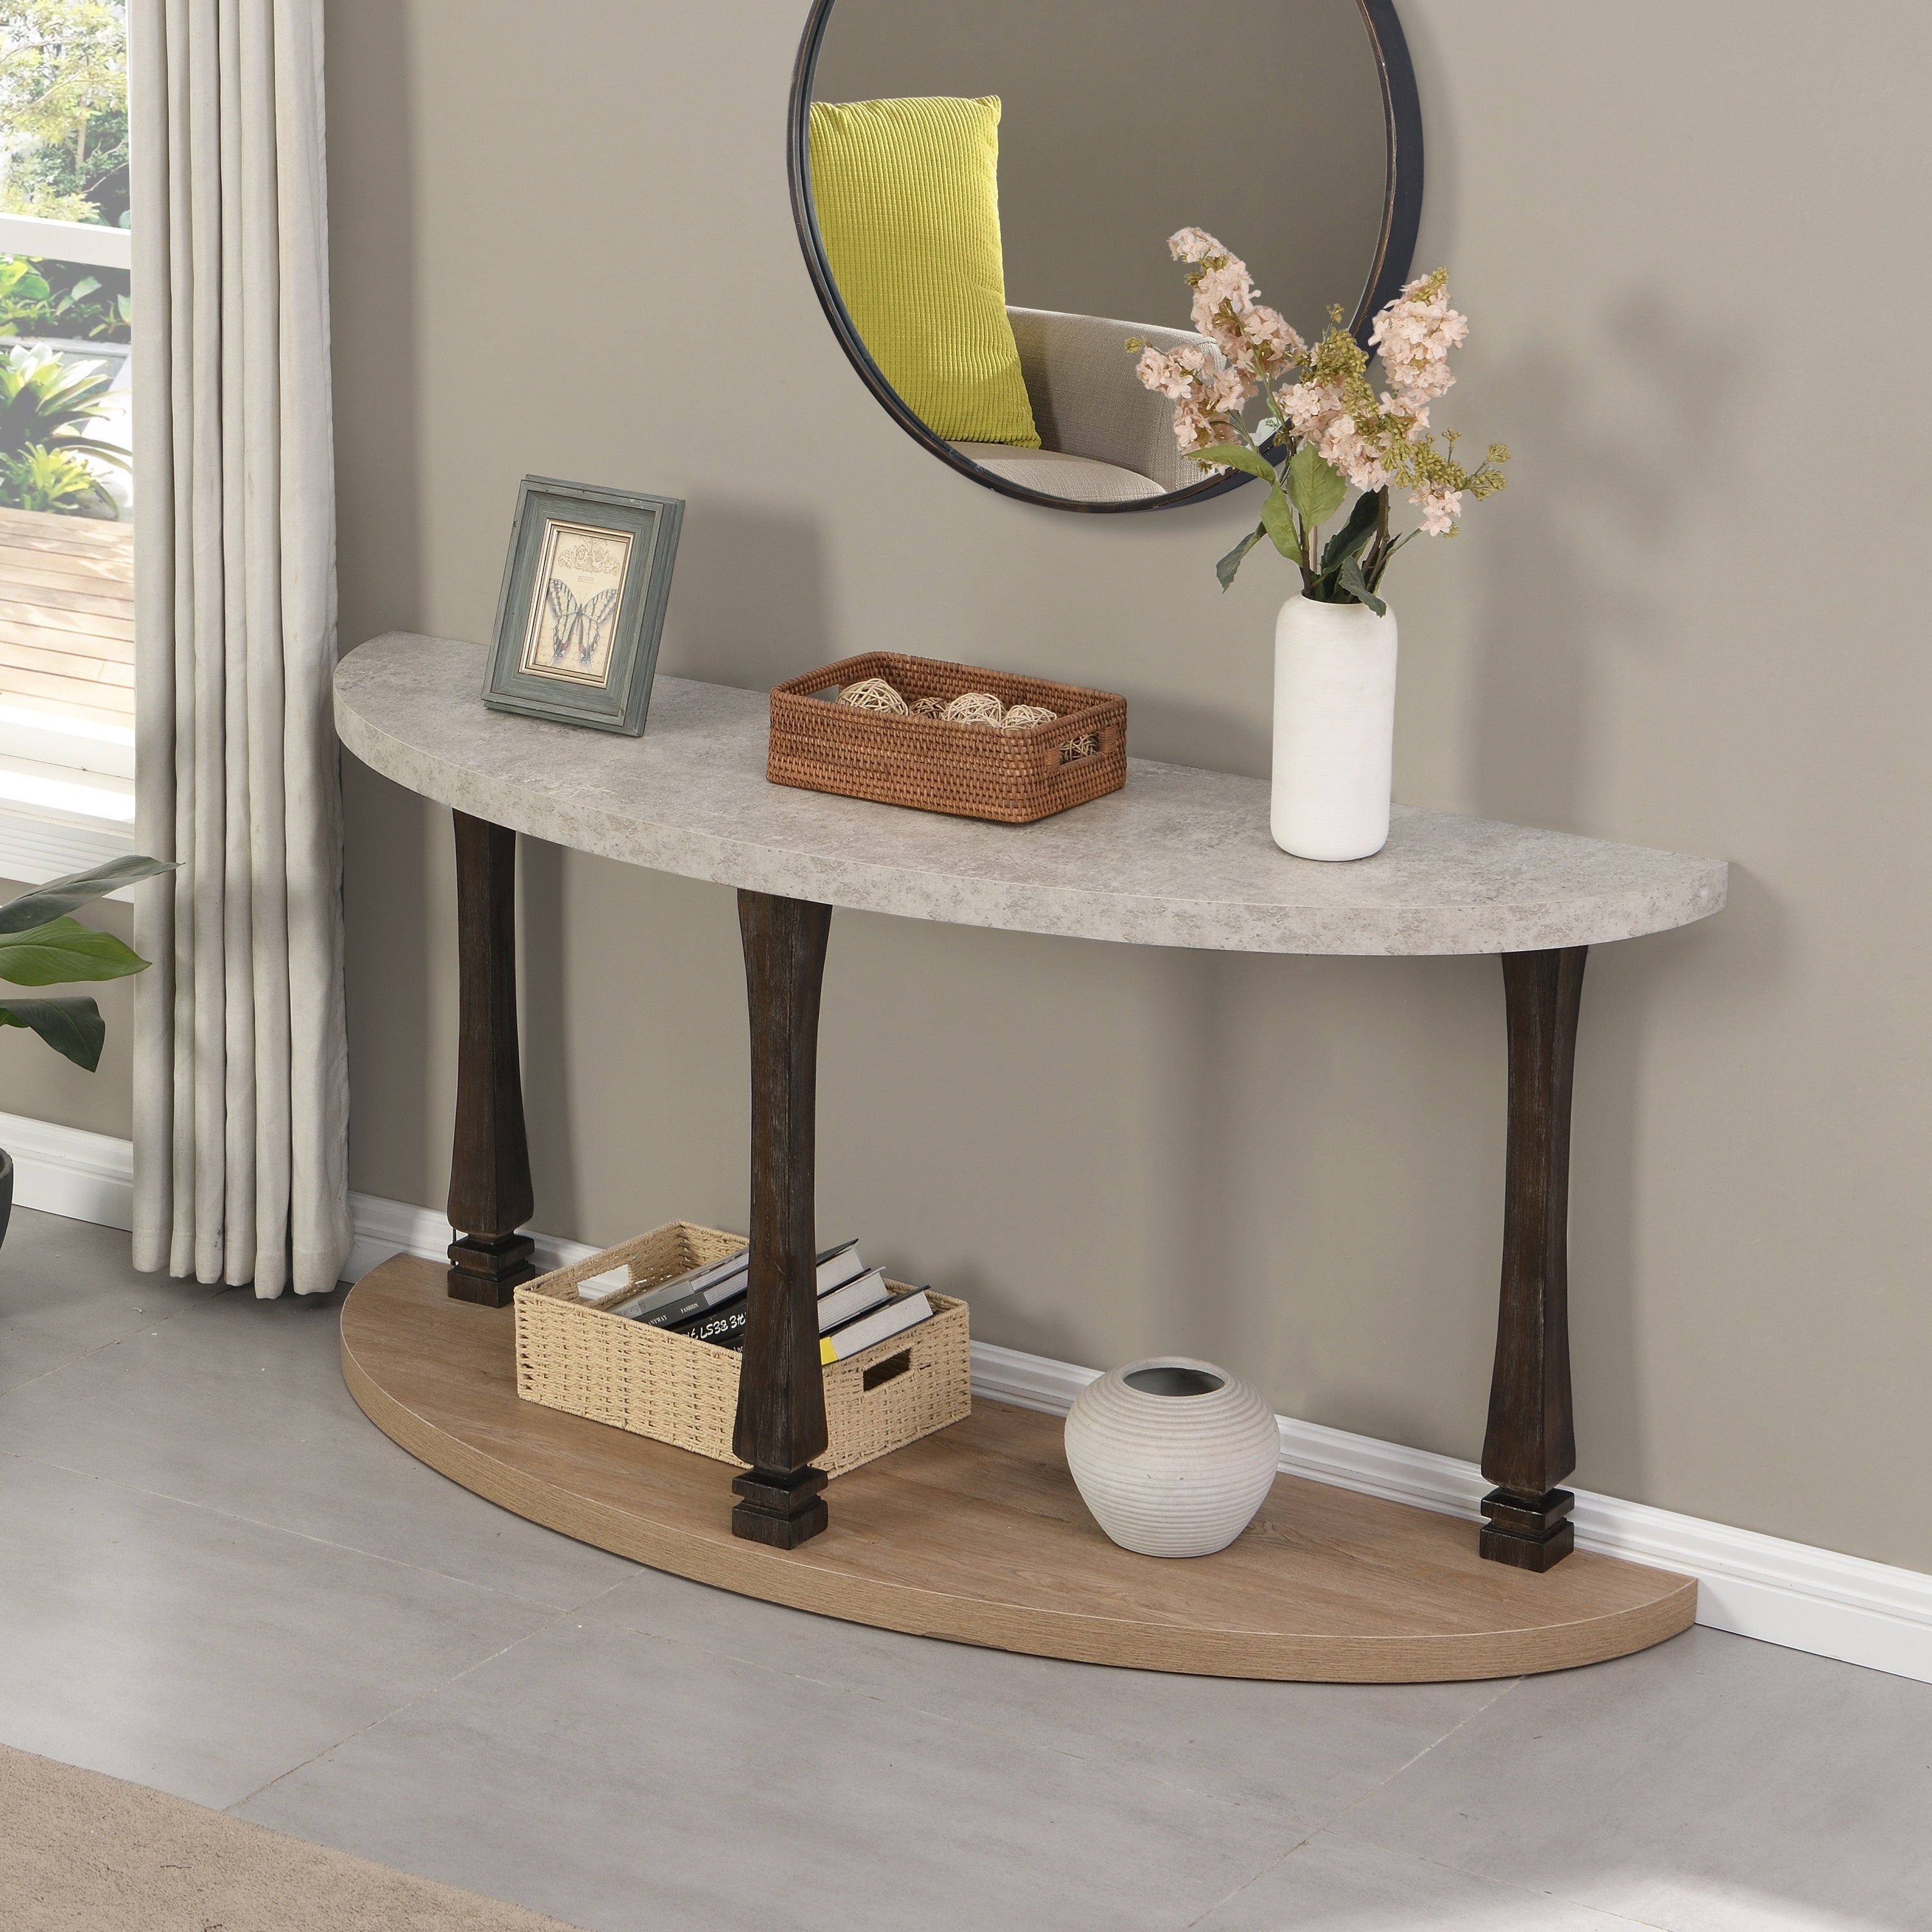 🆓🚛 48" Long Semi Circle Demilune Sofa Table for Small Hallway Entryway Space, Wooden Half Moon Sturdy Console Tables, Gray & Natural